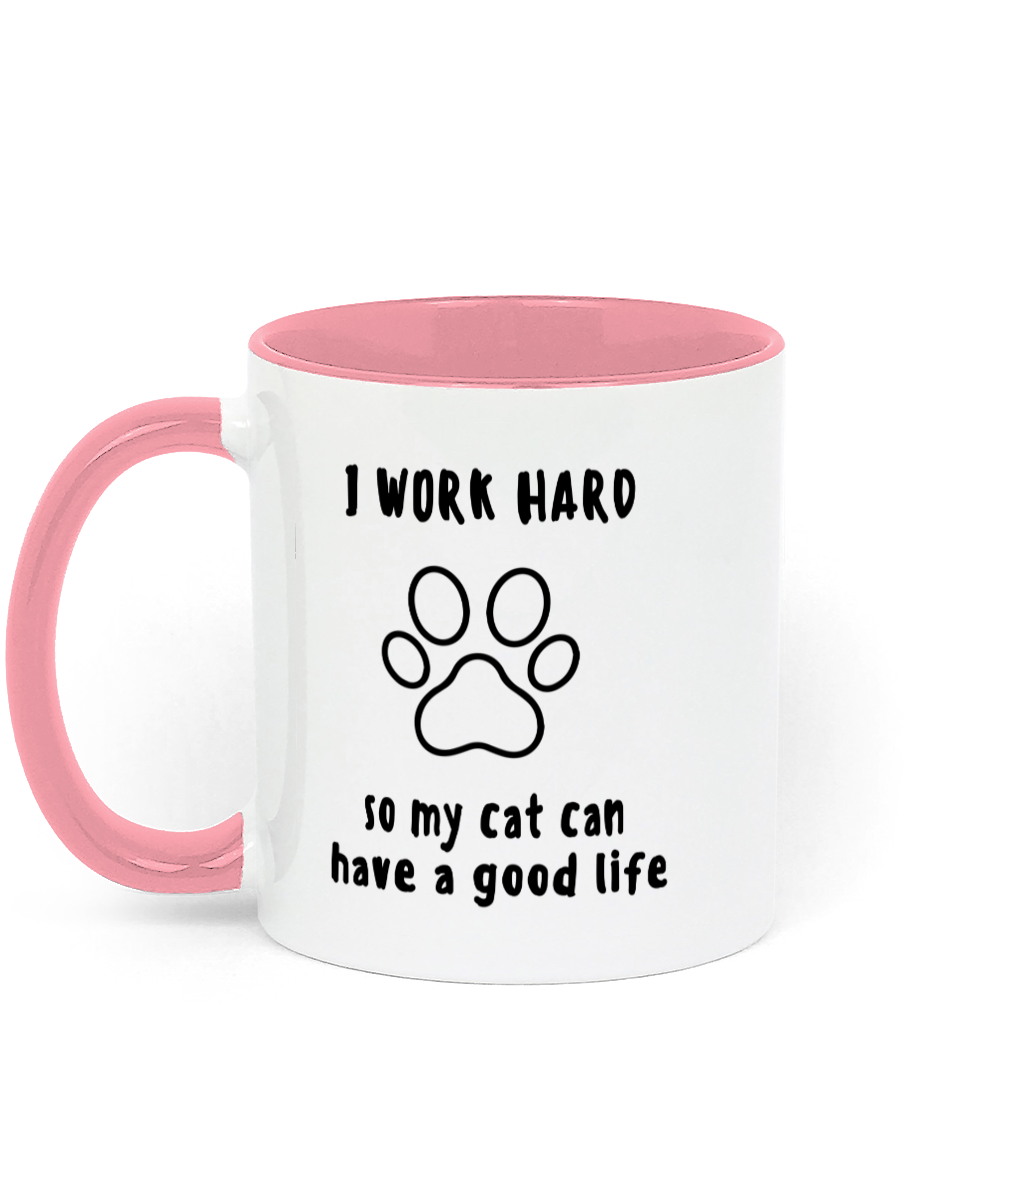 I Work Hard so My Cat Can Have a Good life. 11 oz mug. Cat Lover. Perfect Gift.Two-Toned. Pink.